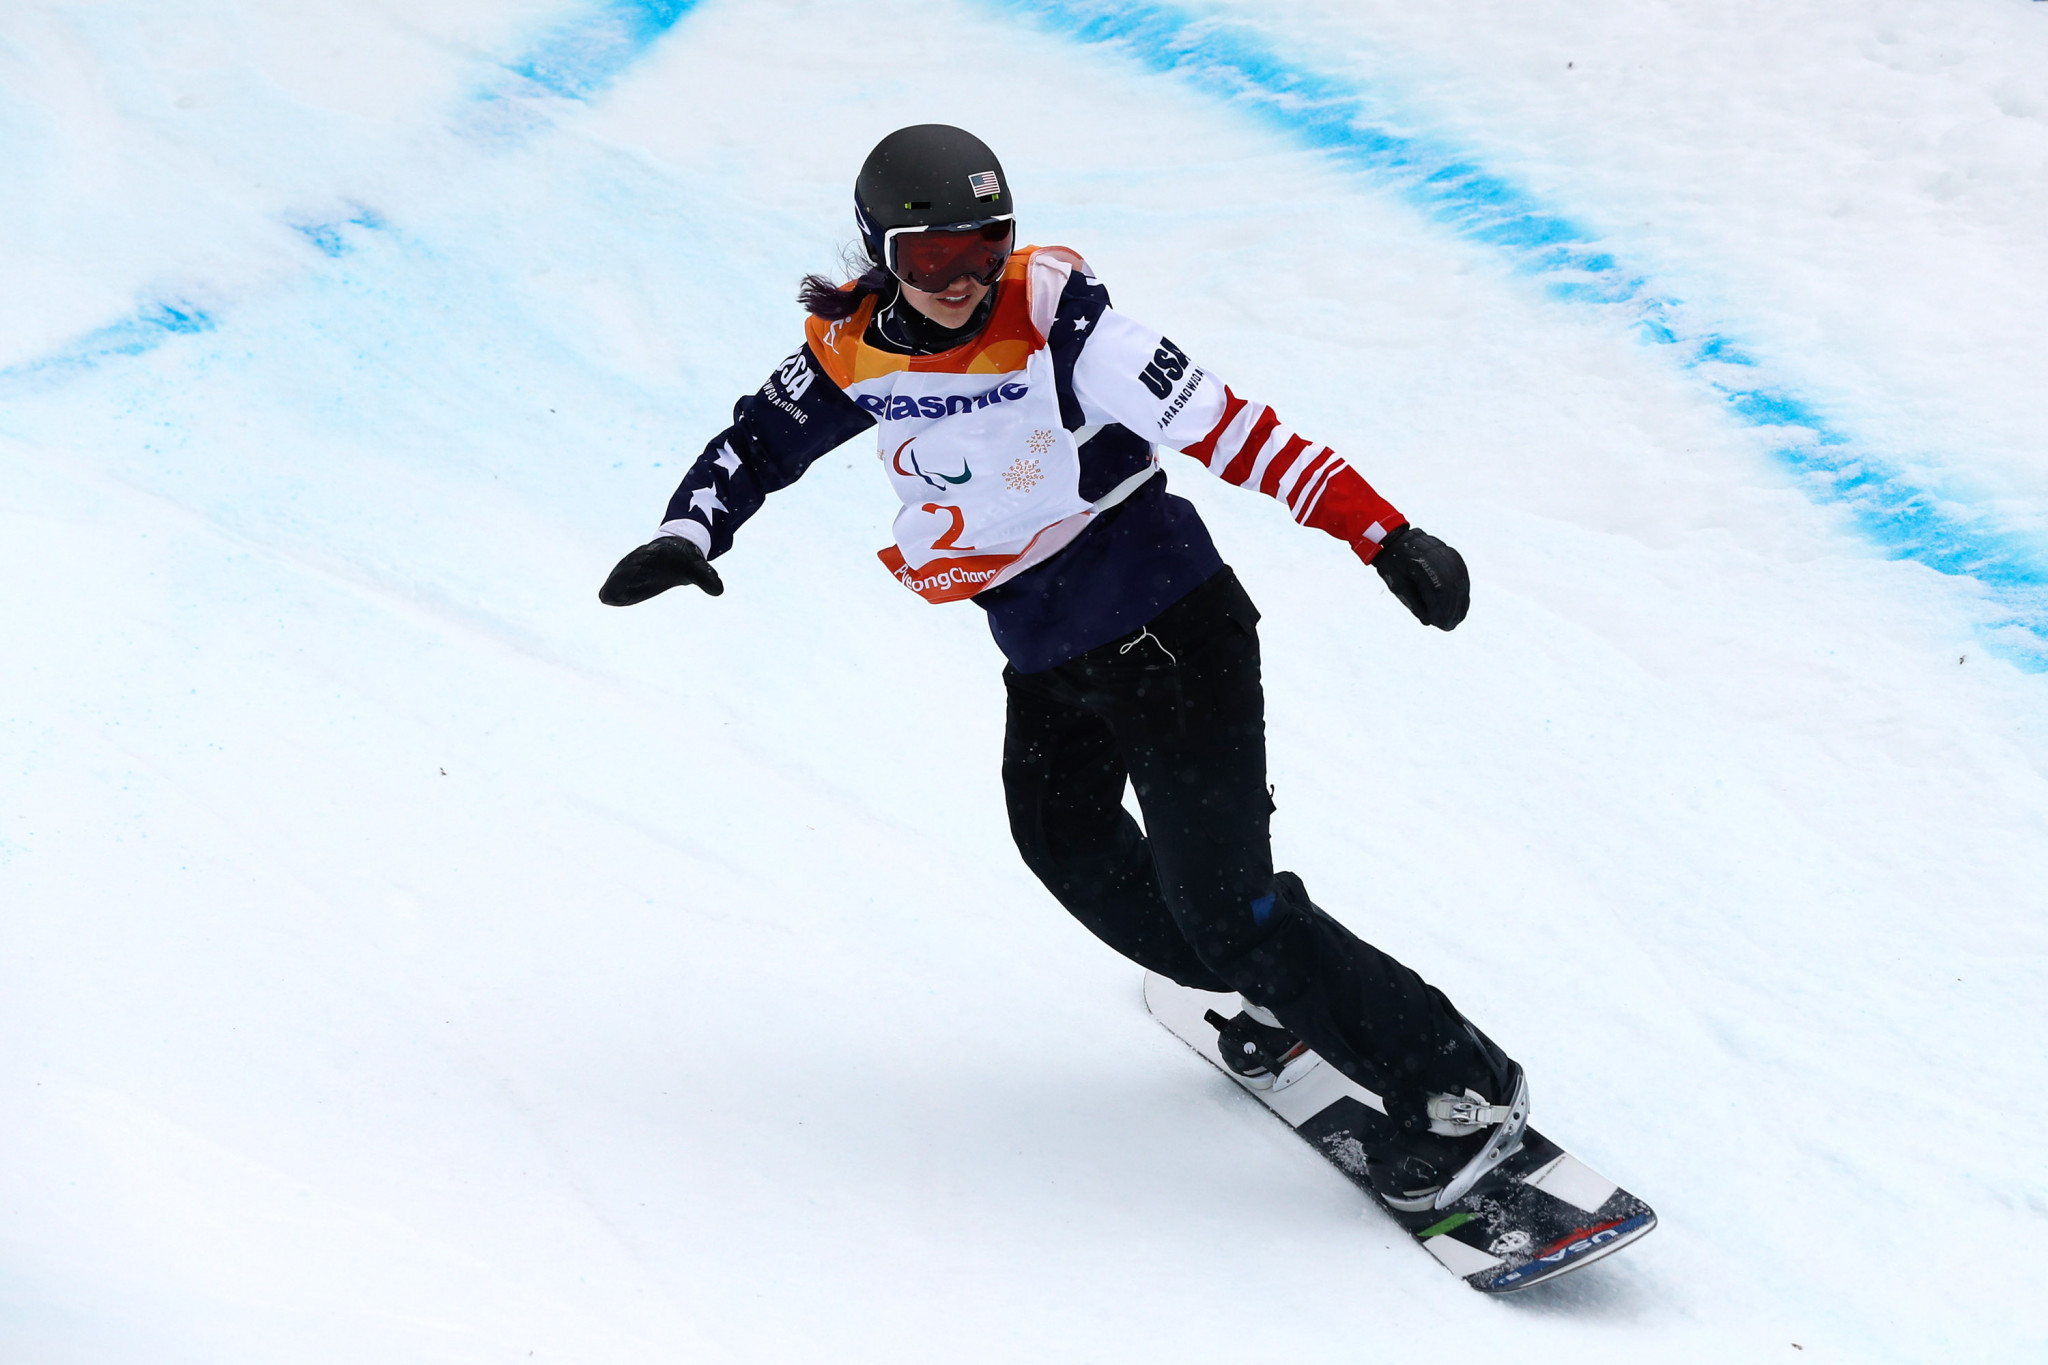 US Paralympics announce three gold medallists in snowboarding team